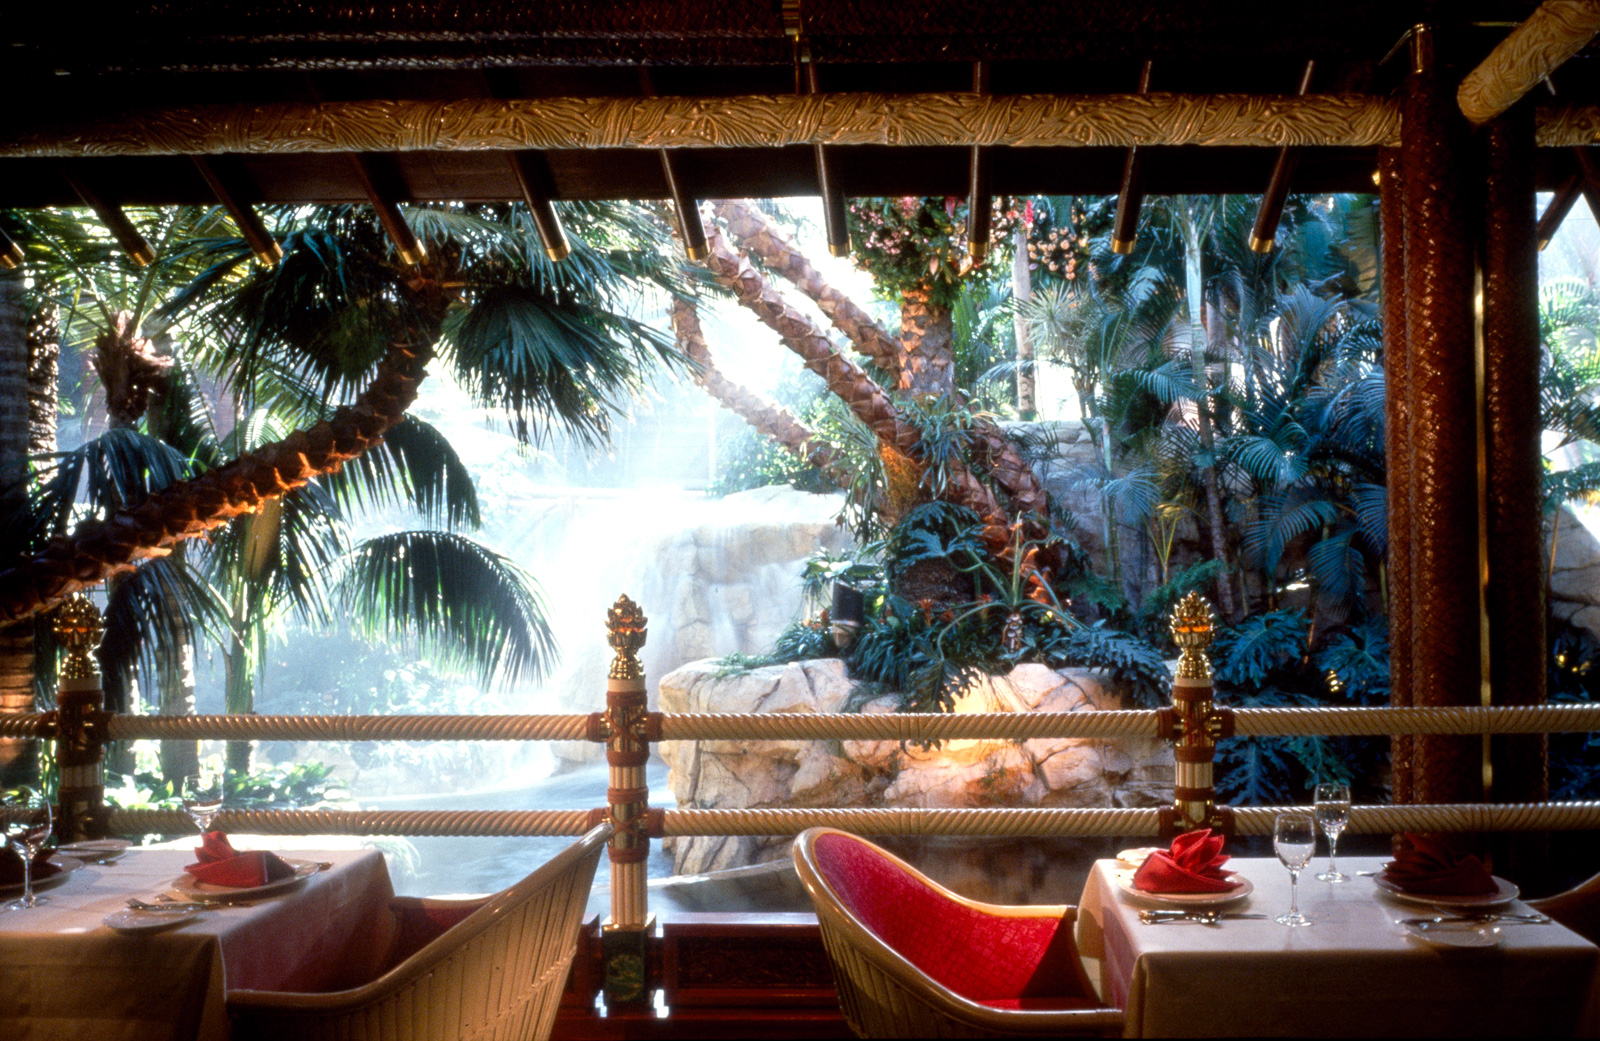 A photograph of the Mirage’s Kokomo restaurant showing plants in the building’s atrium taken in nineteen eighty-nine, the year that developer Steve Wynn opened his Polynesian-themed casino resort.